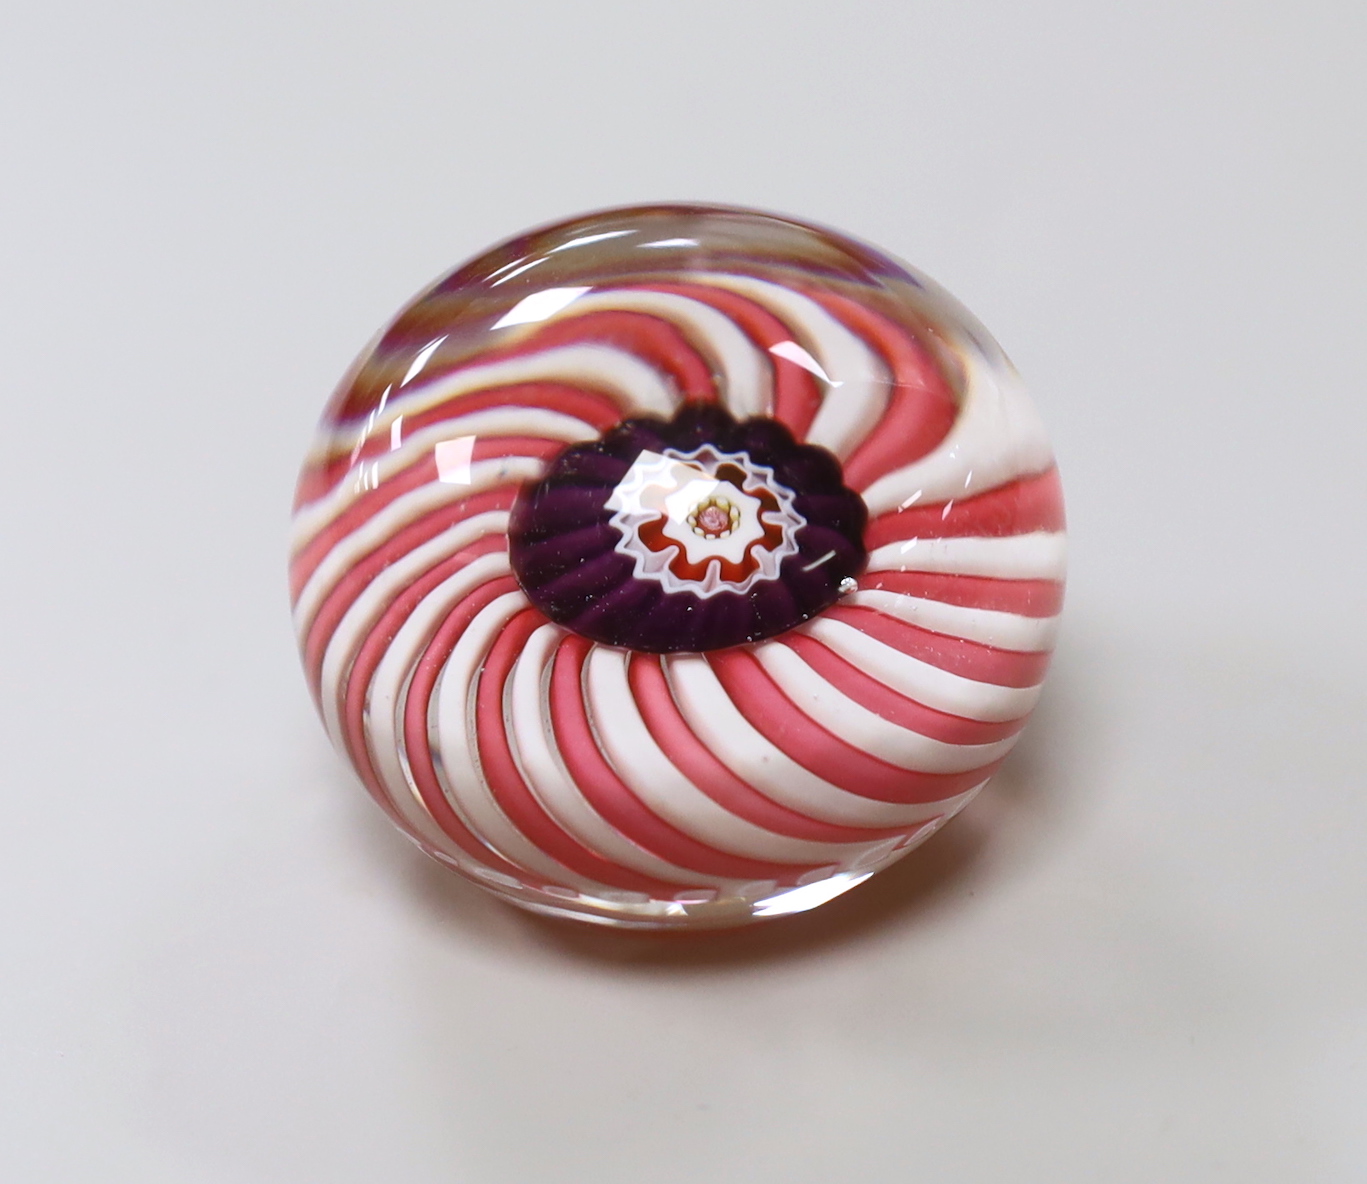 A Clichy swirl paperweight, 4.5cm approximate diameter